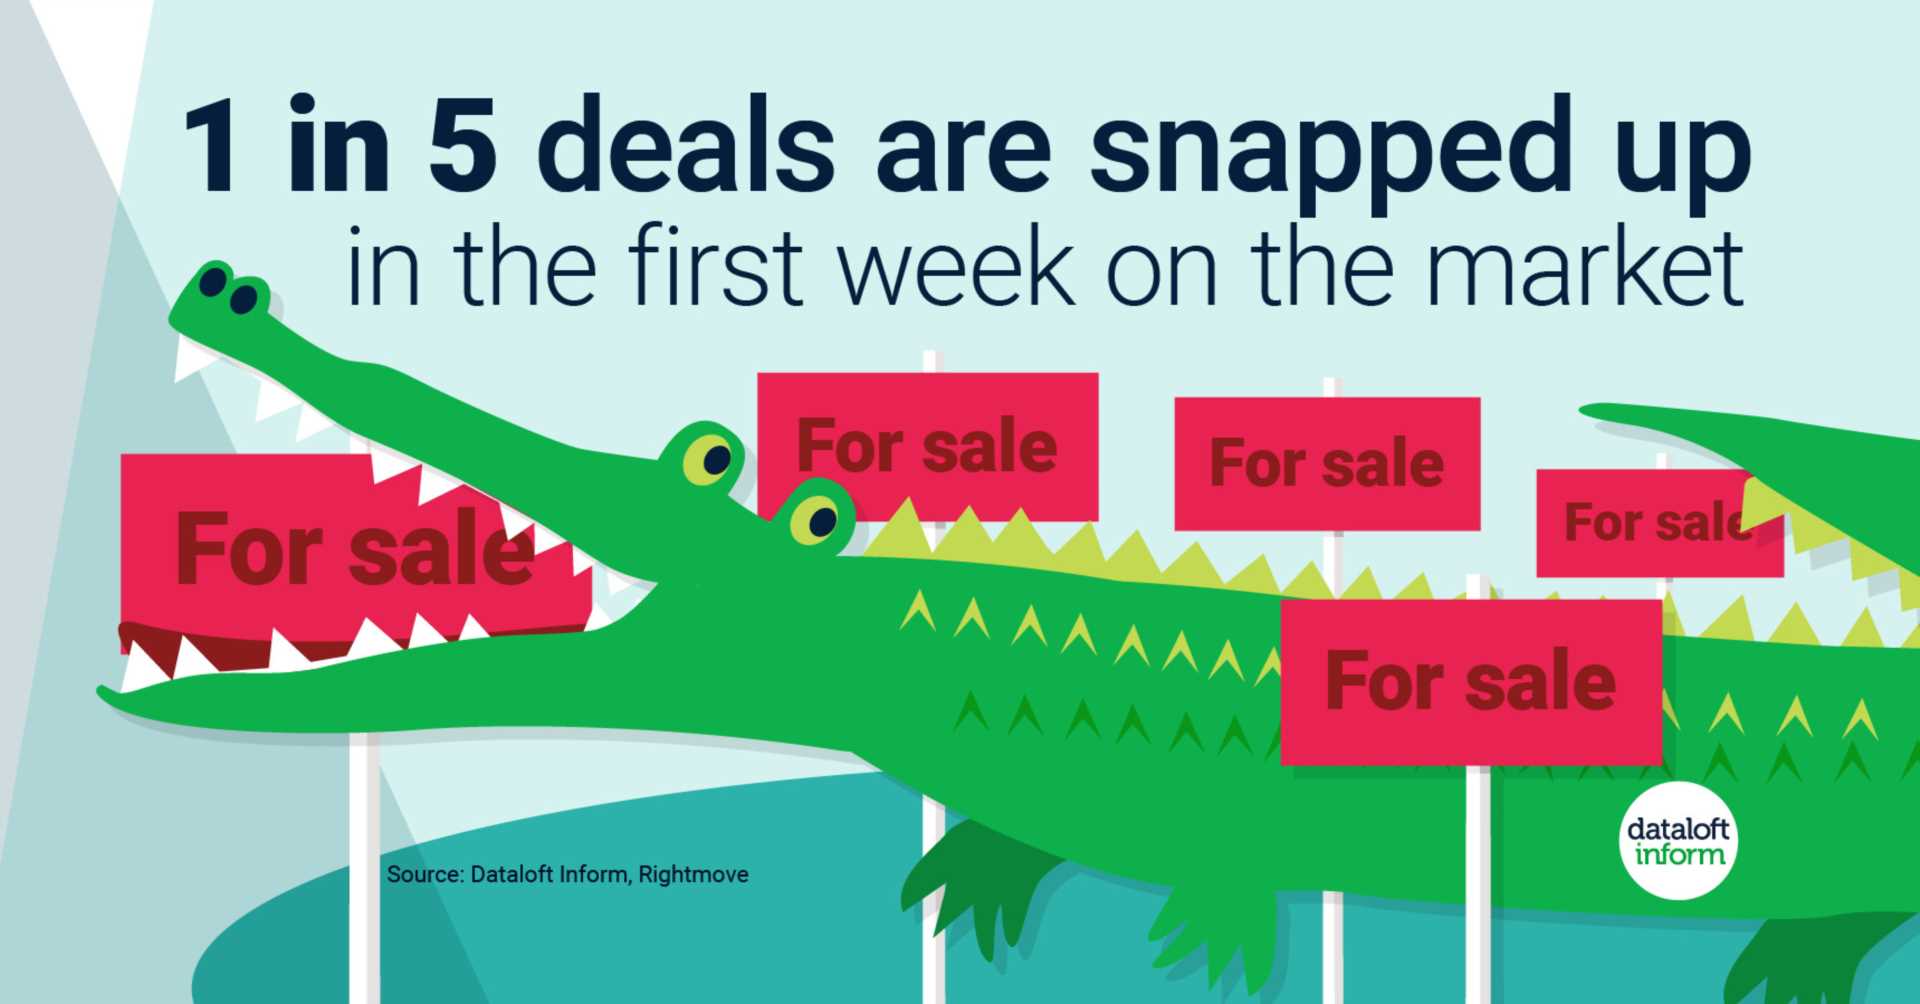 1 in 5 deals snapped up in the first week on the market